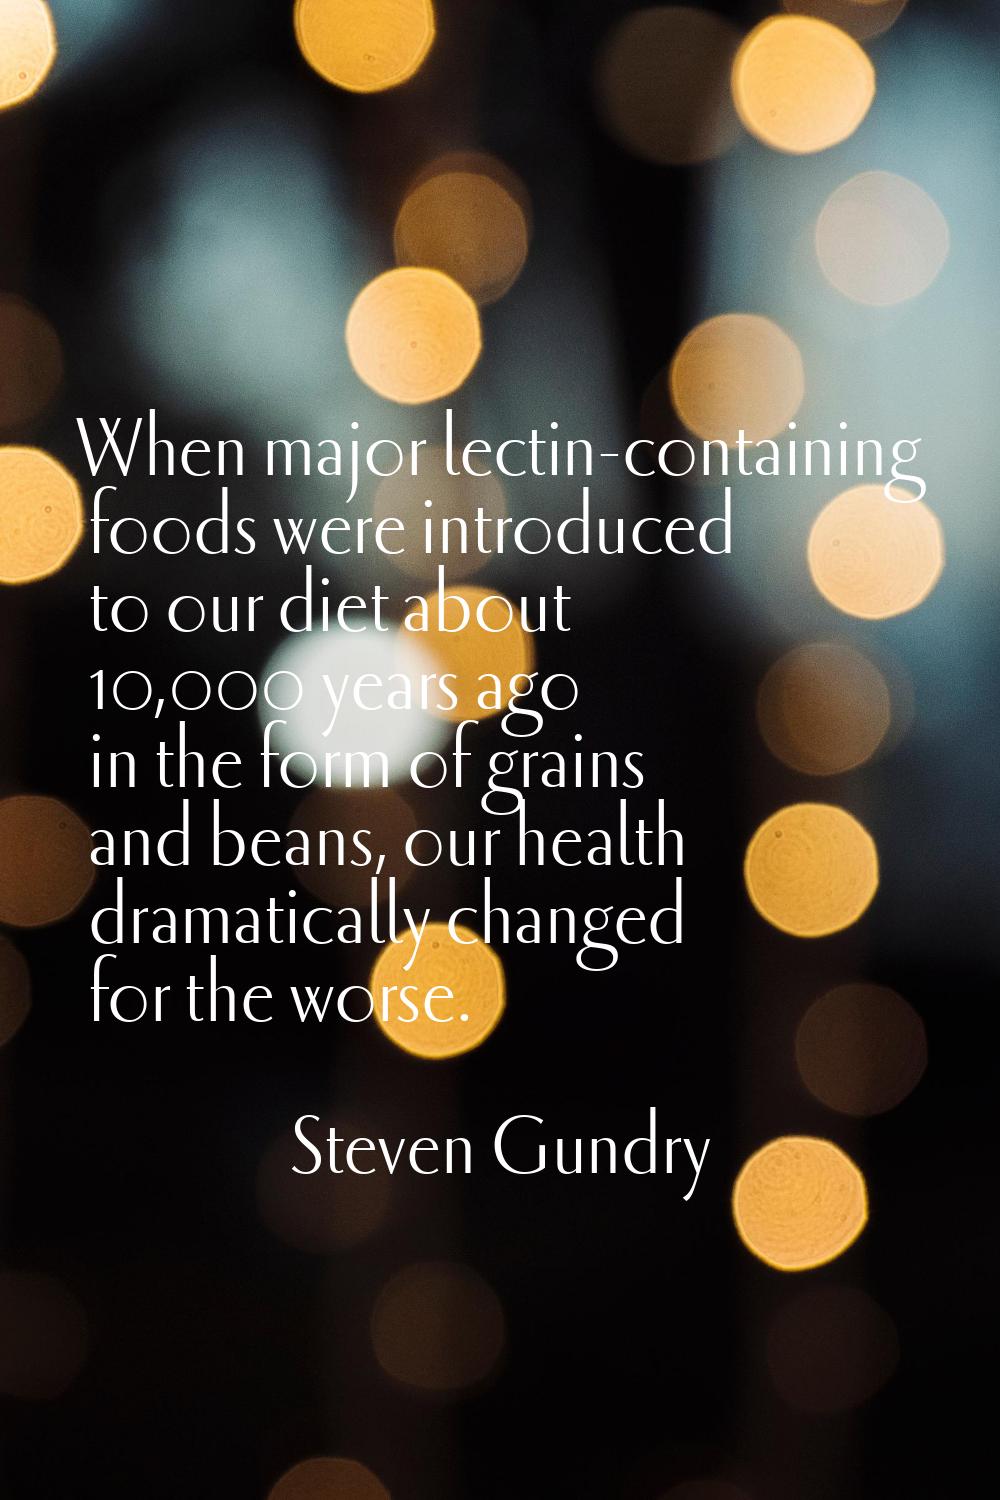 When major lectin-containing foods were introduced to our diet about 10,000 years ago in the form o